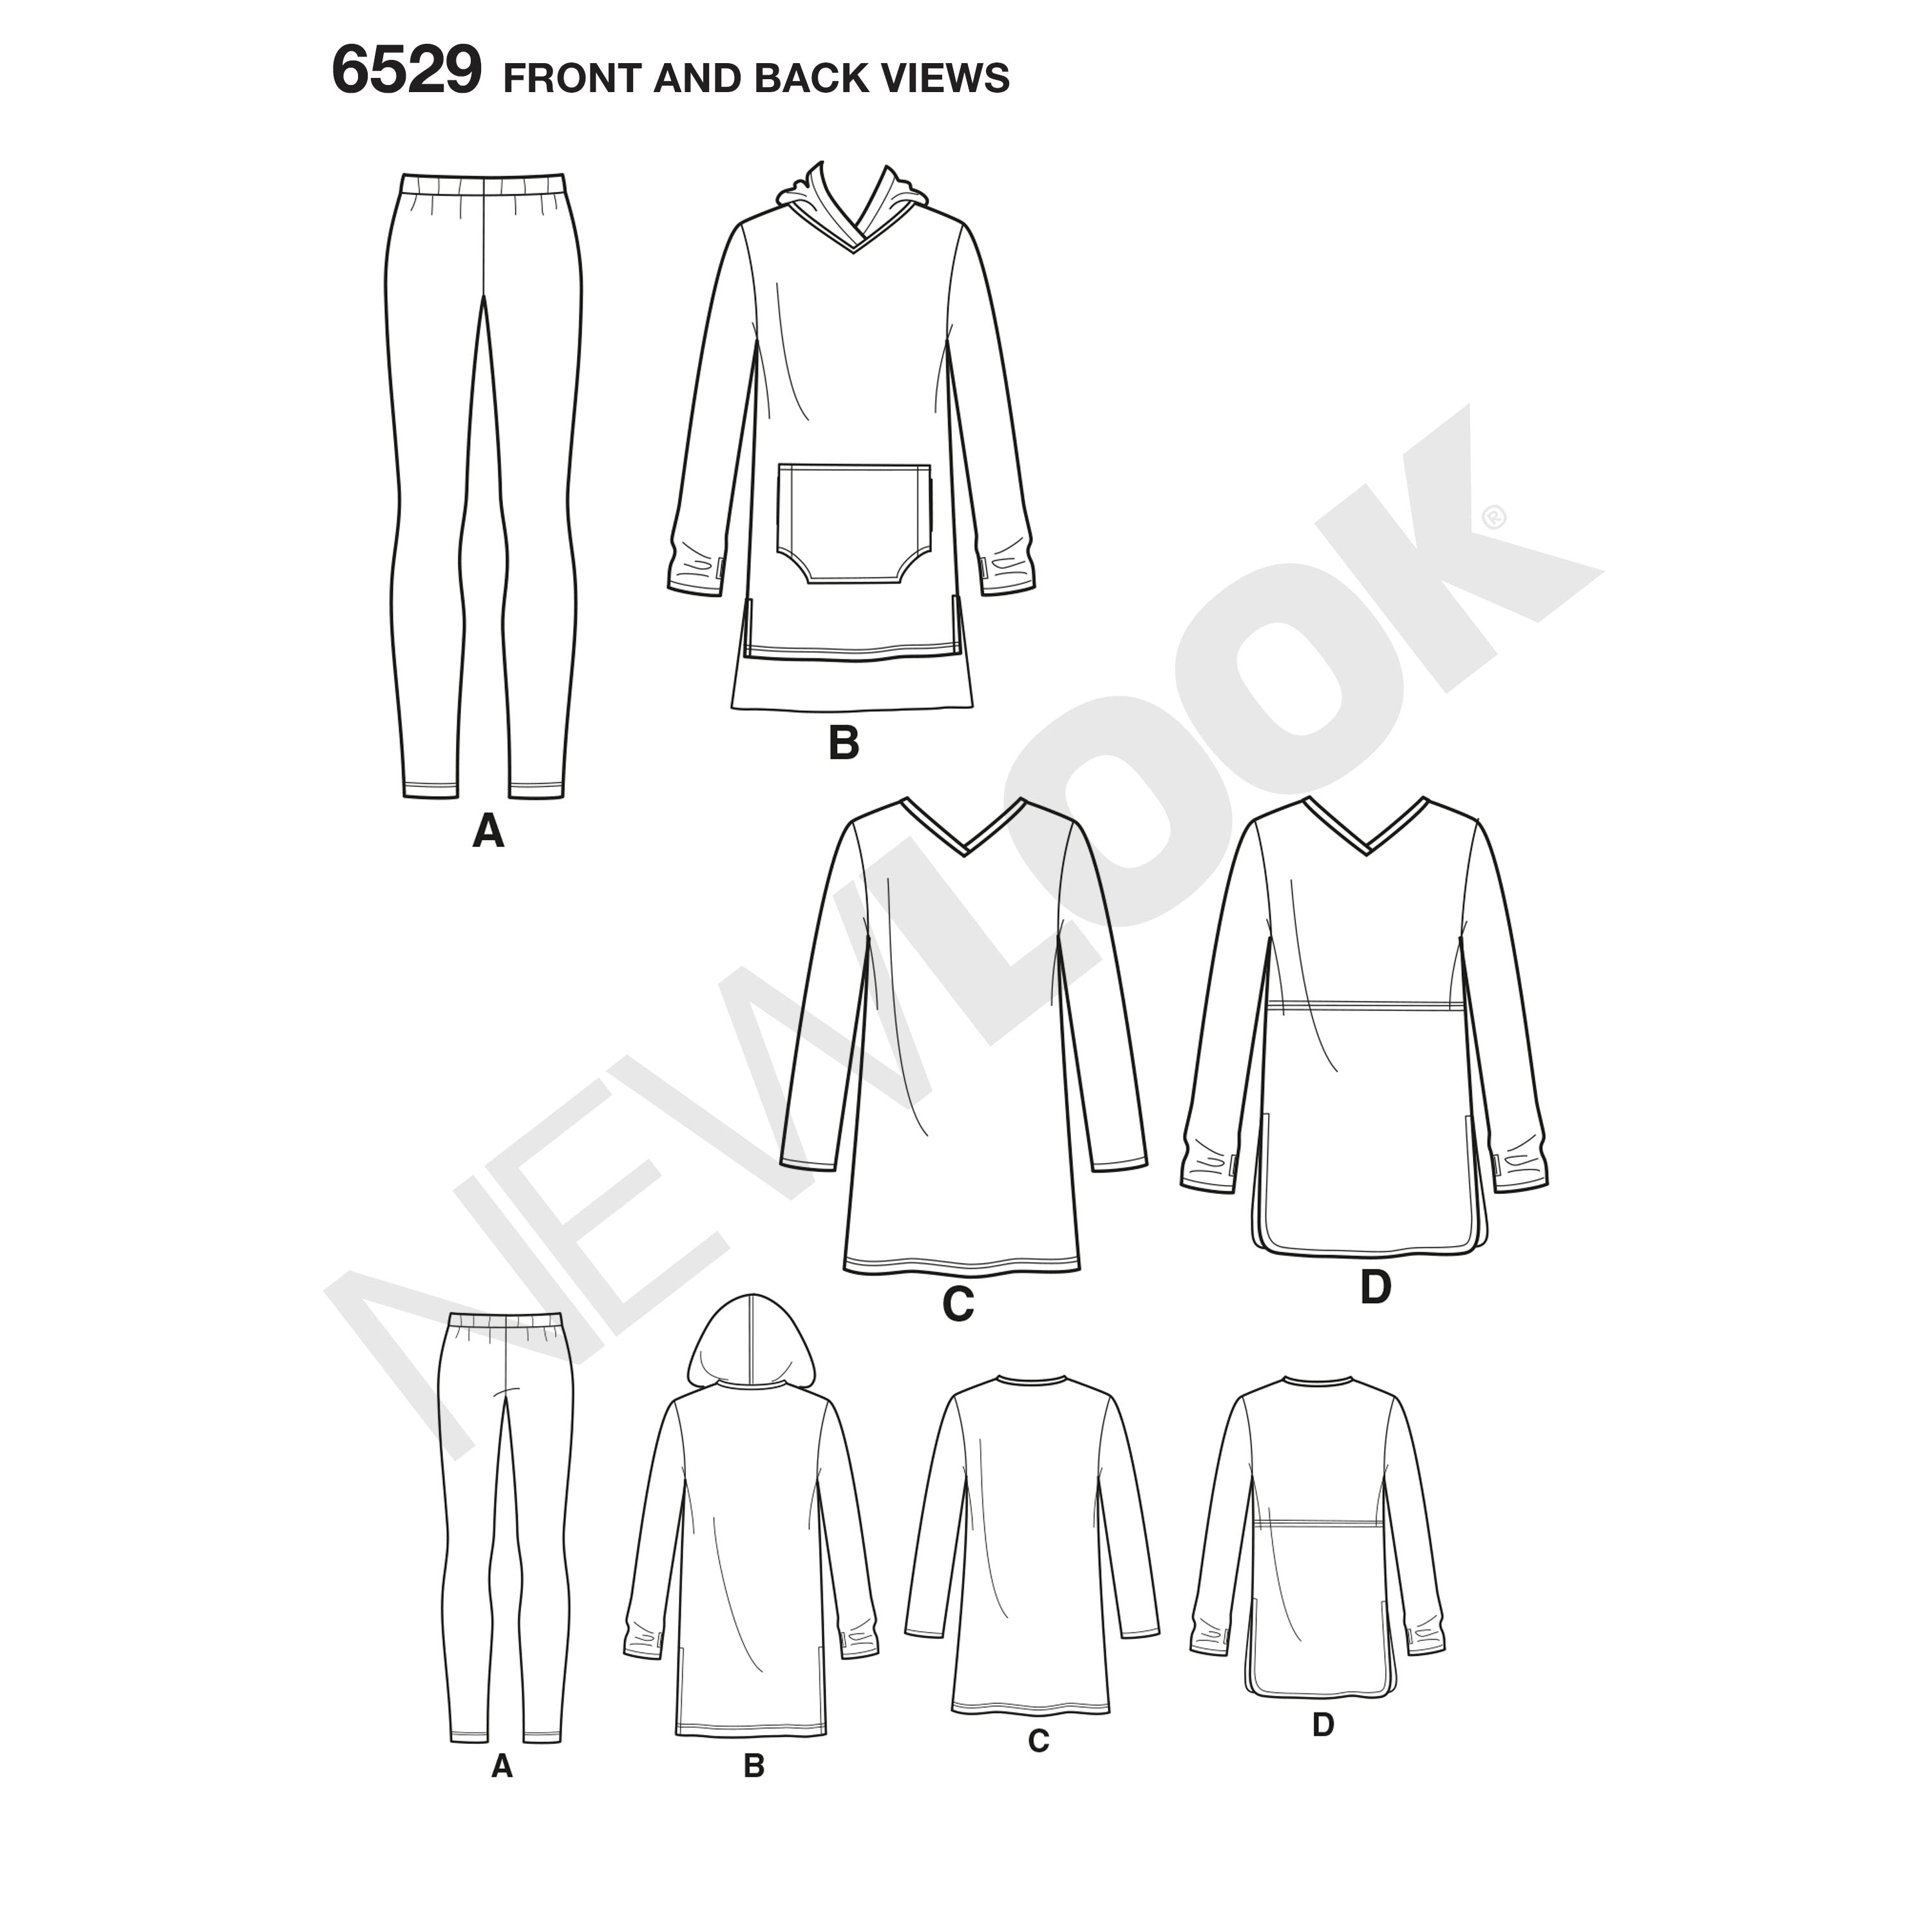 New Look Sewing Pattern 6529 - Women's Knit Tunics and Leggings – My Sewing  Box